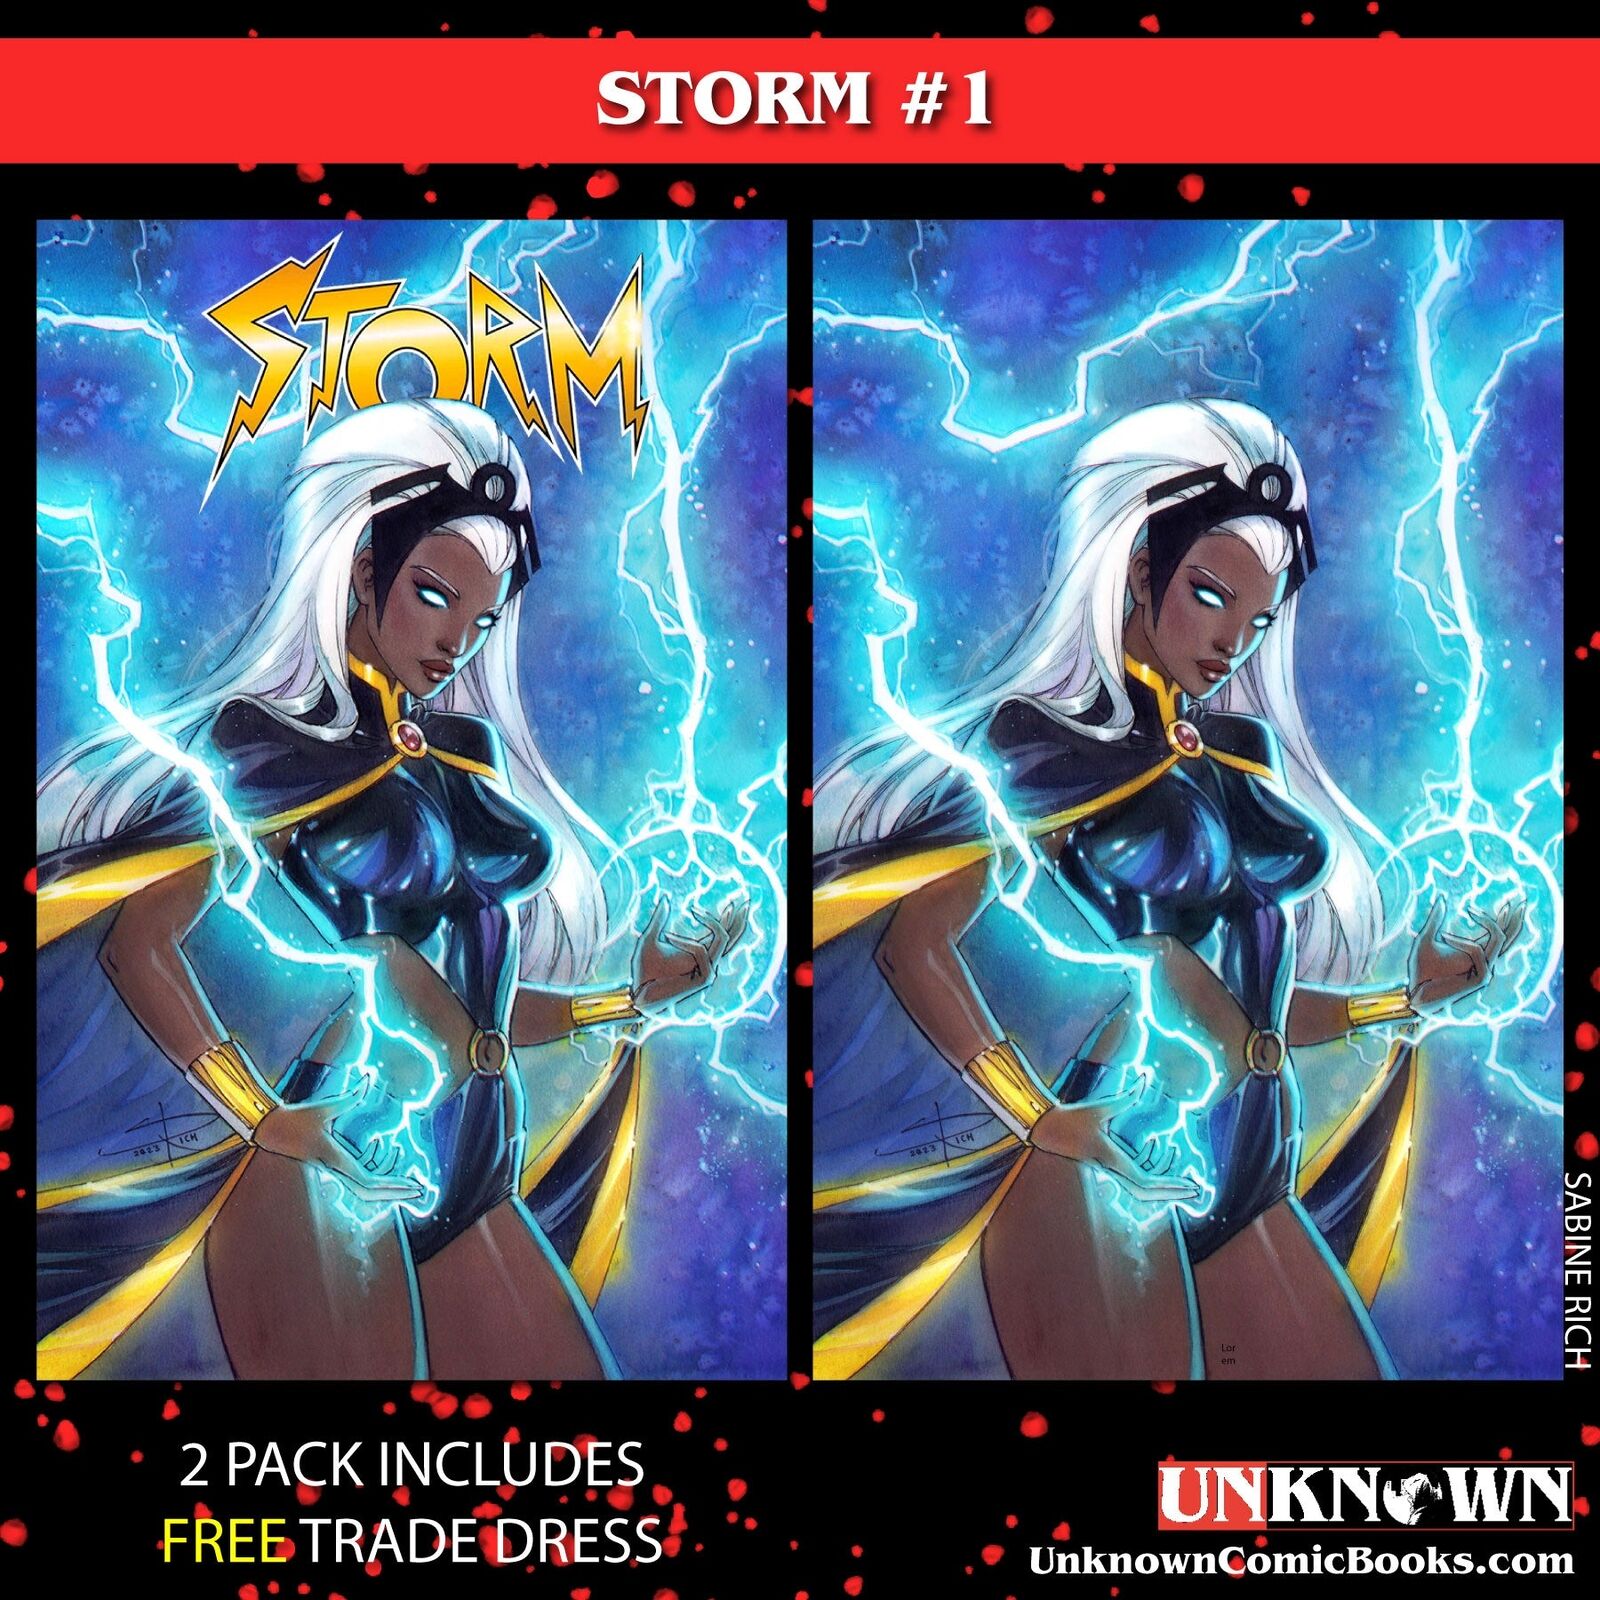 [2 PACK] **FREE TRADE DRESS** STORM #1 UNKNOWN COMICS SABINE RICH EXCLUSIVE VAR